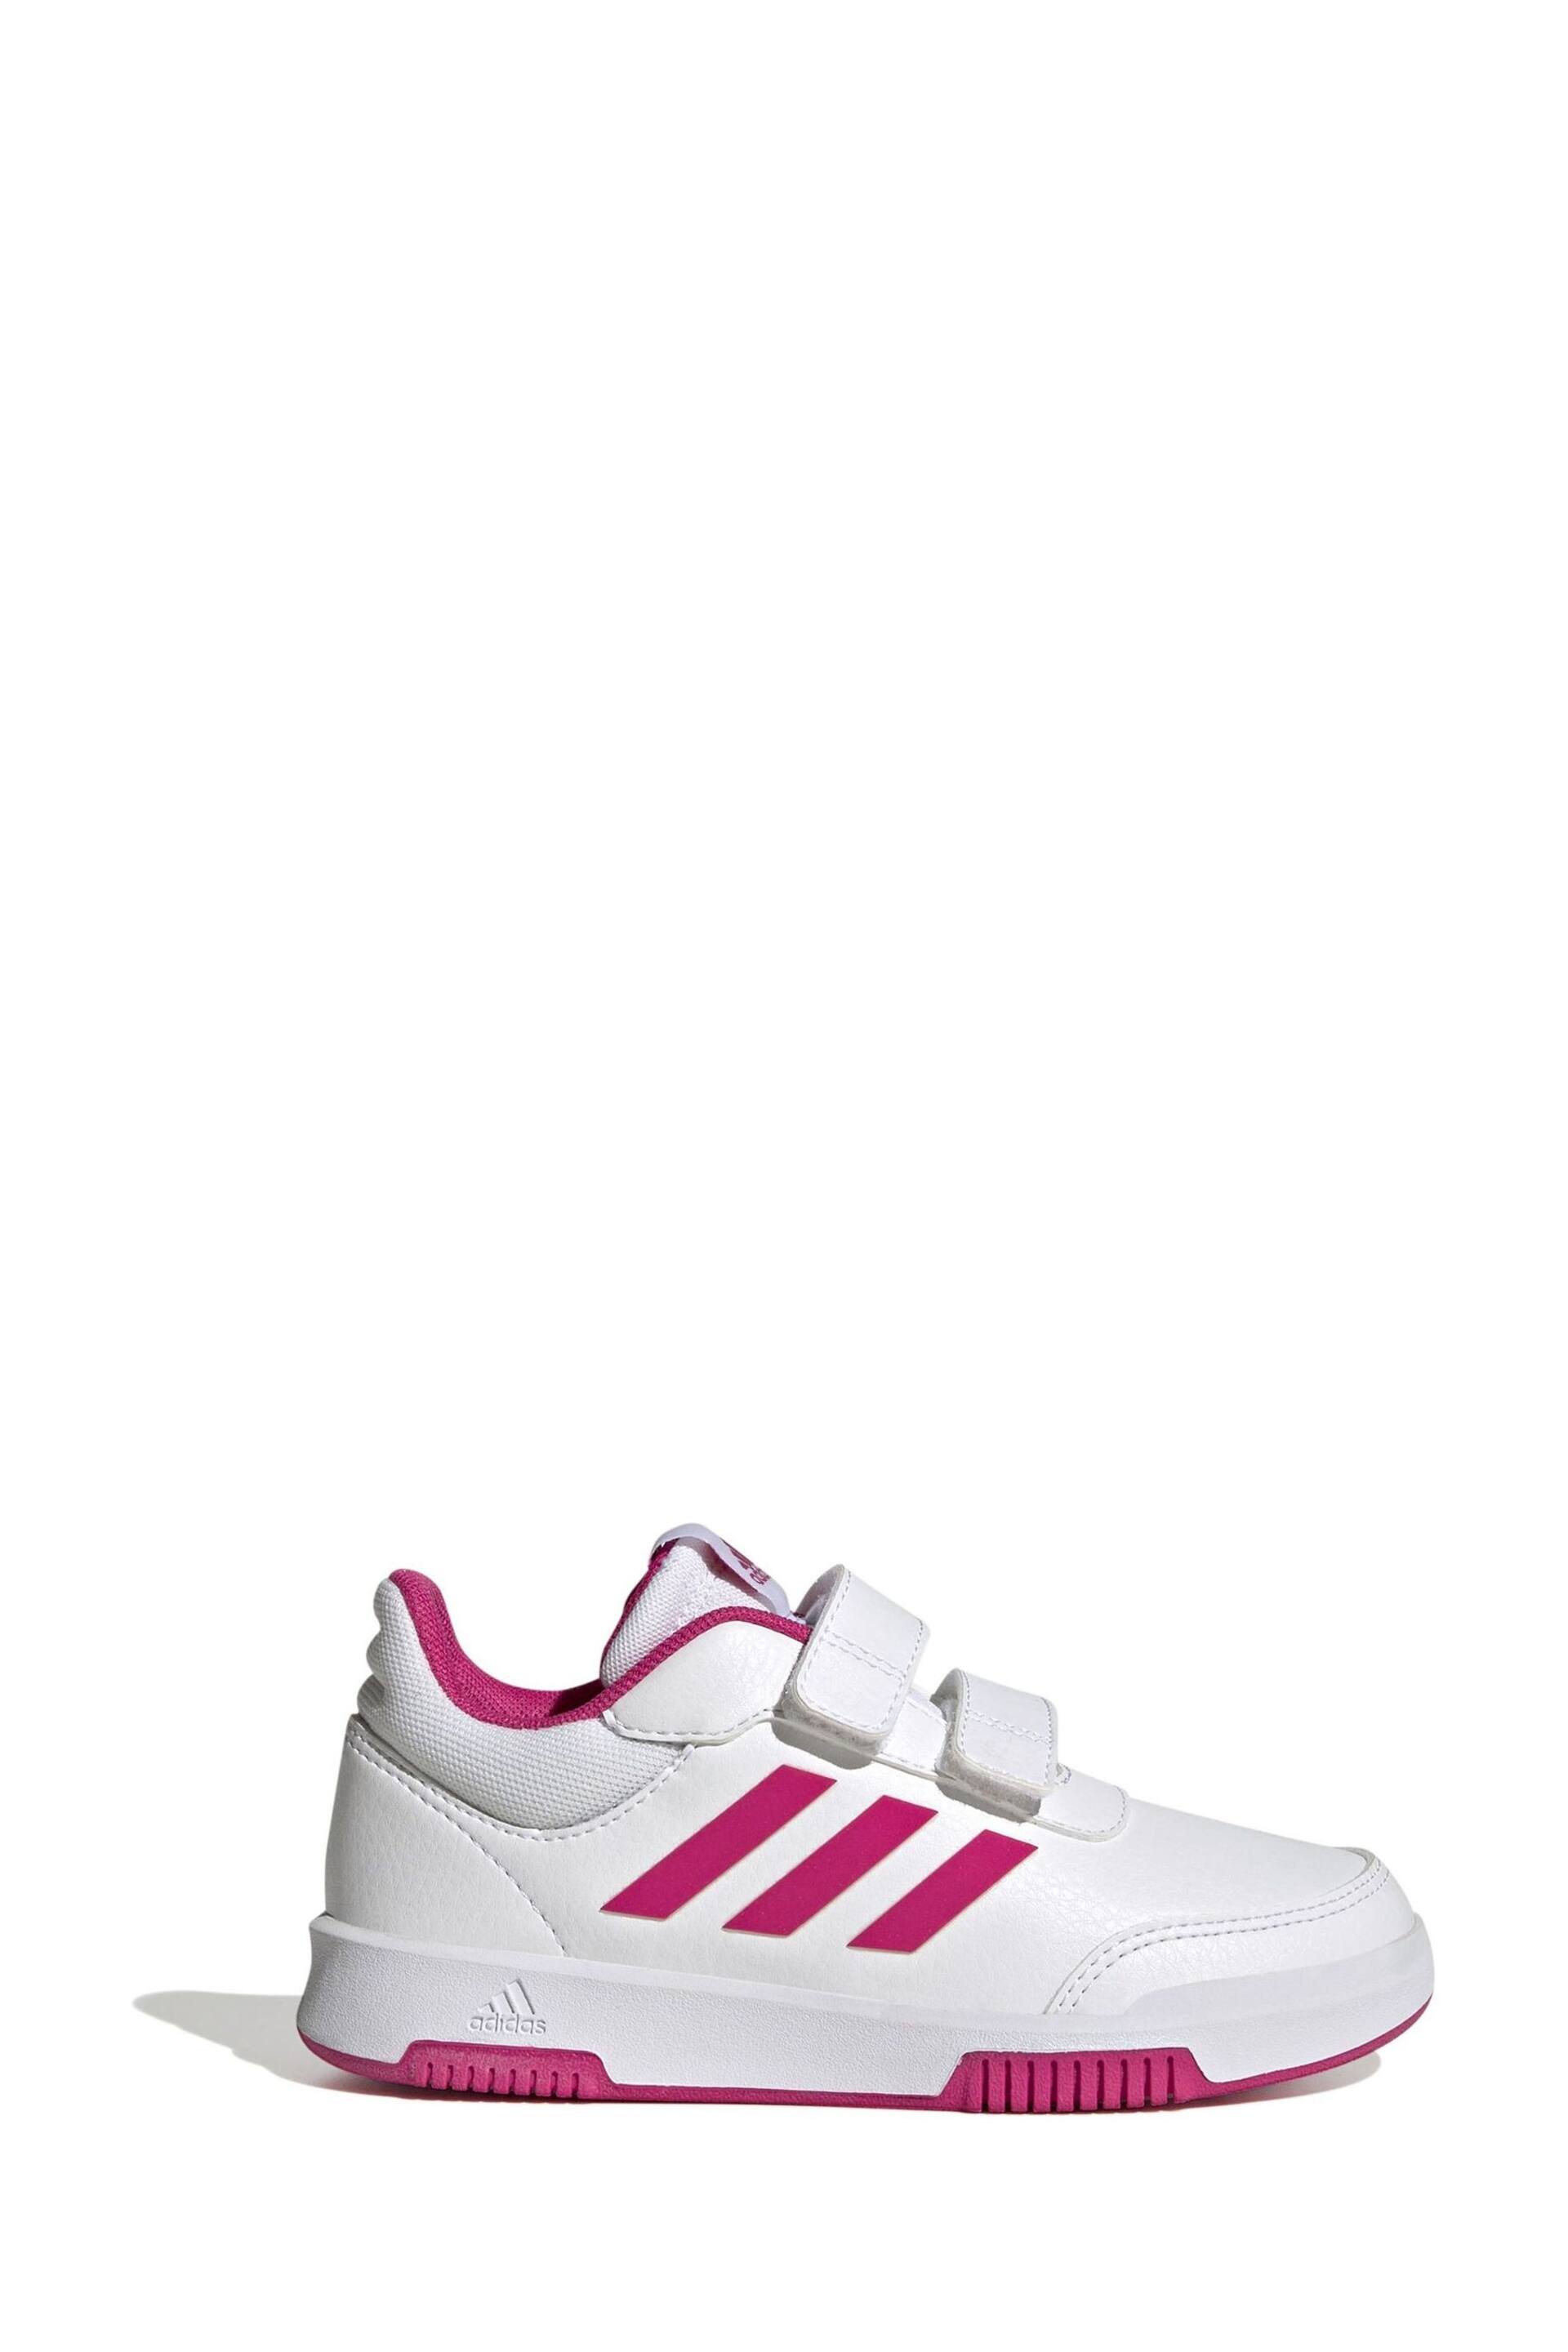 adidas White/Pink Tensaur Hook and Loop Shoes - Image 1 of 9